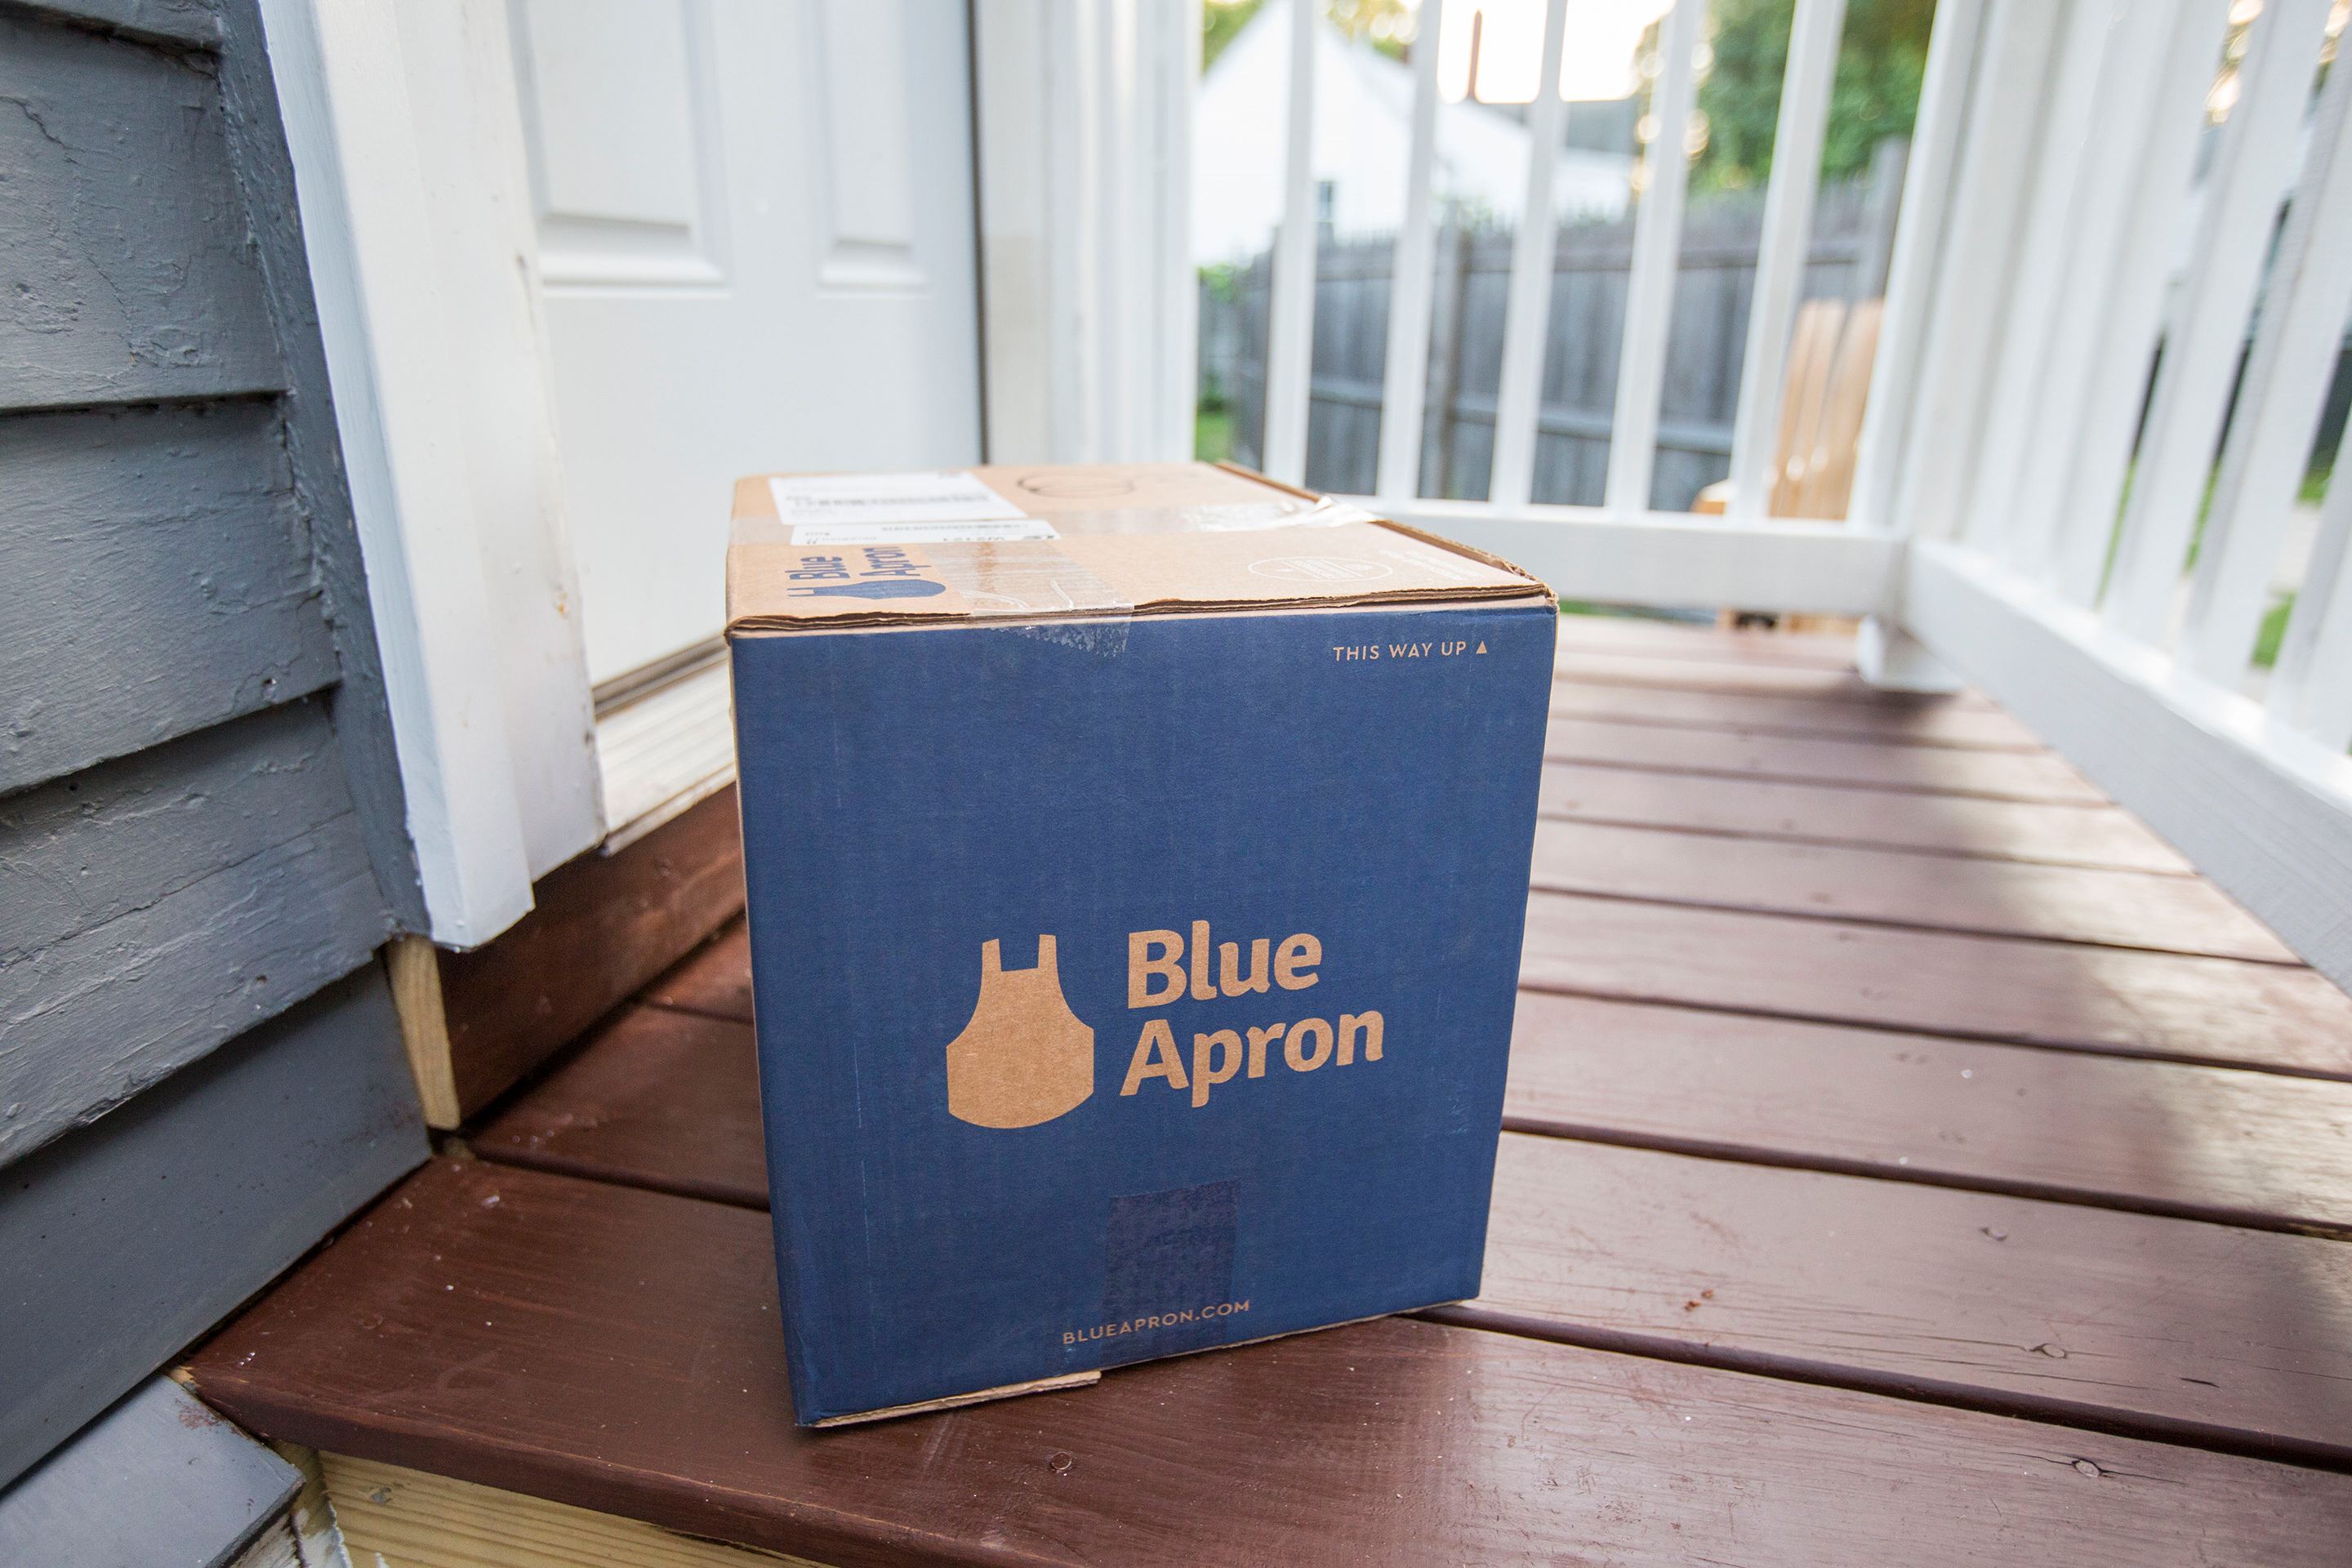 Investors Had All But Given Up on One-Time Unicorn Blue Apron. Then Came Coronavirus